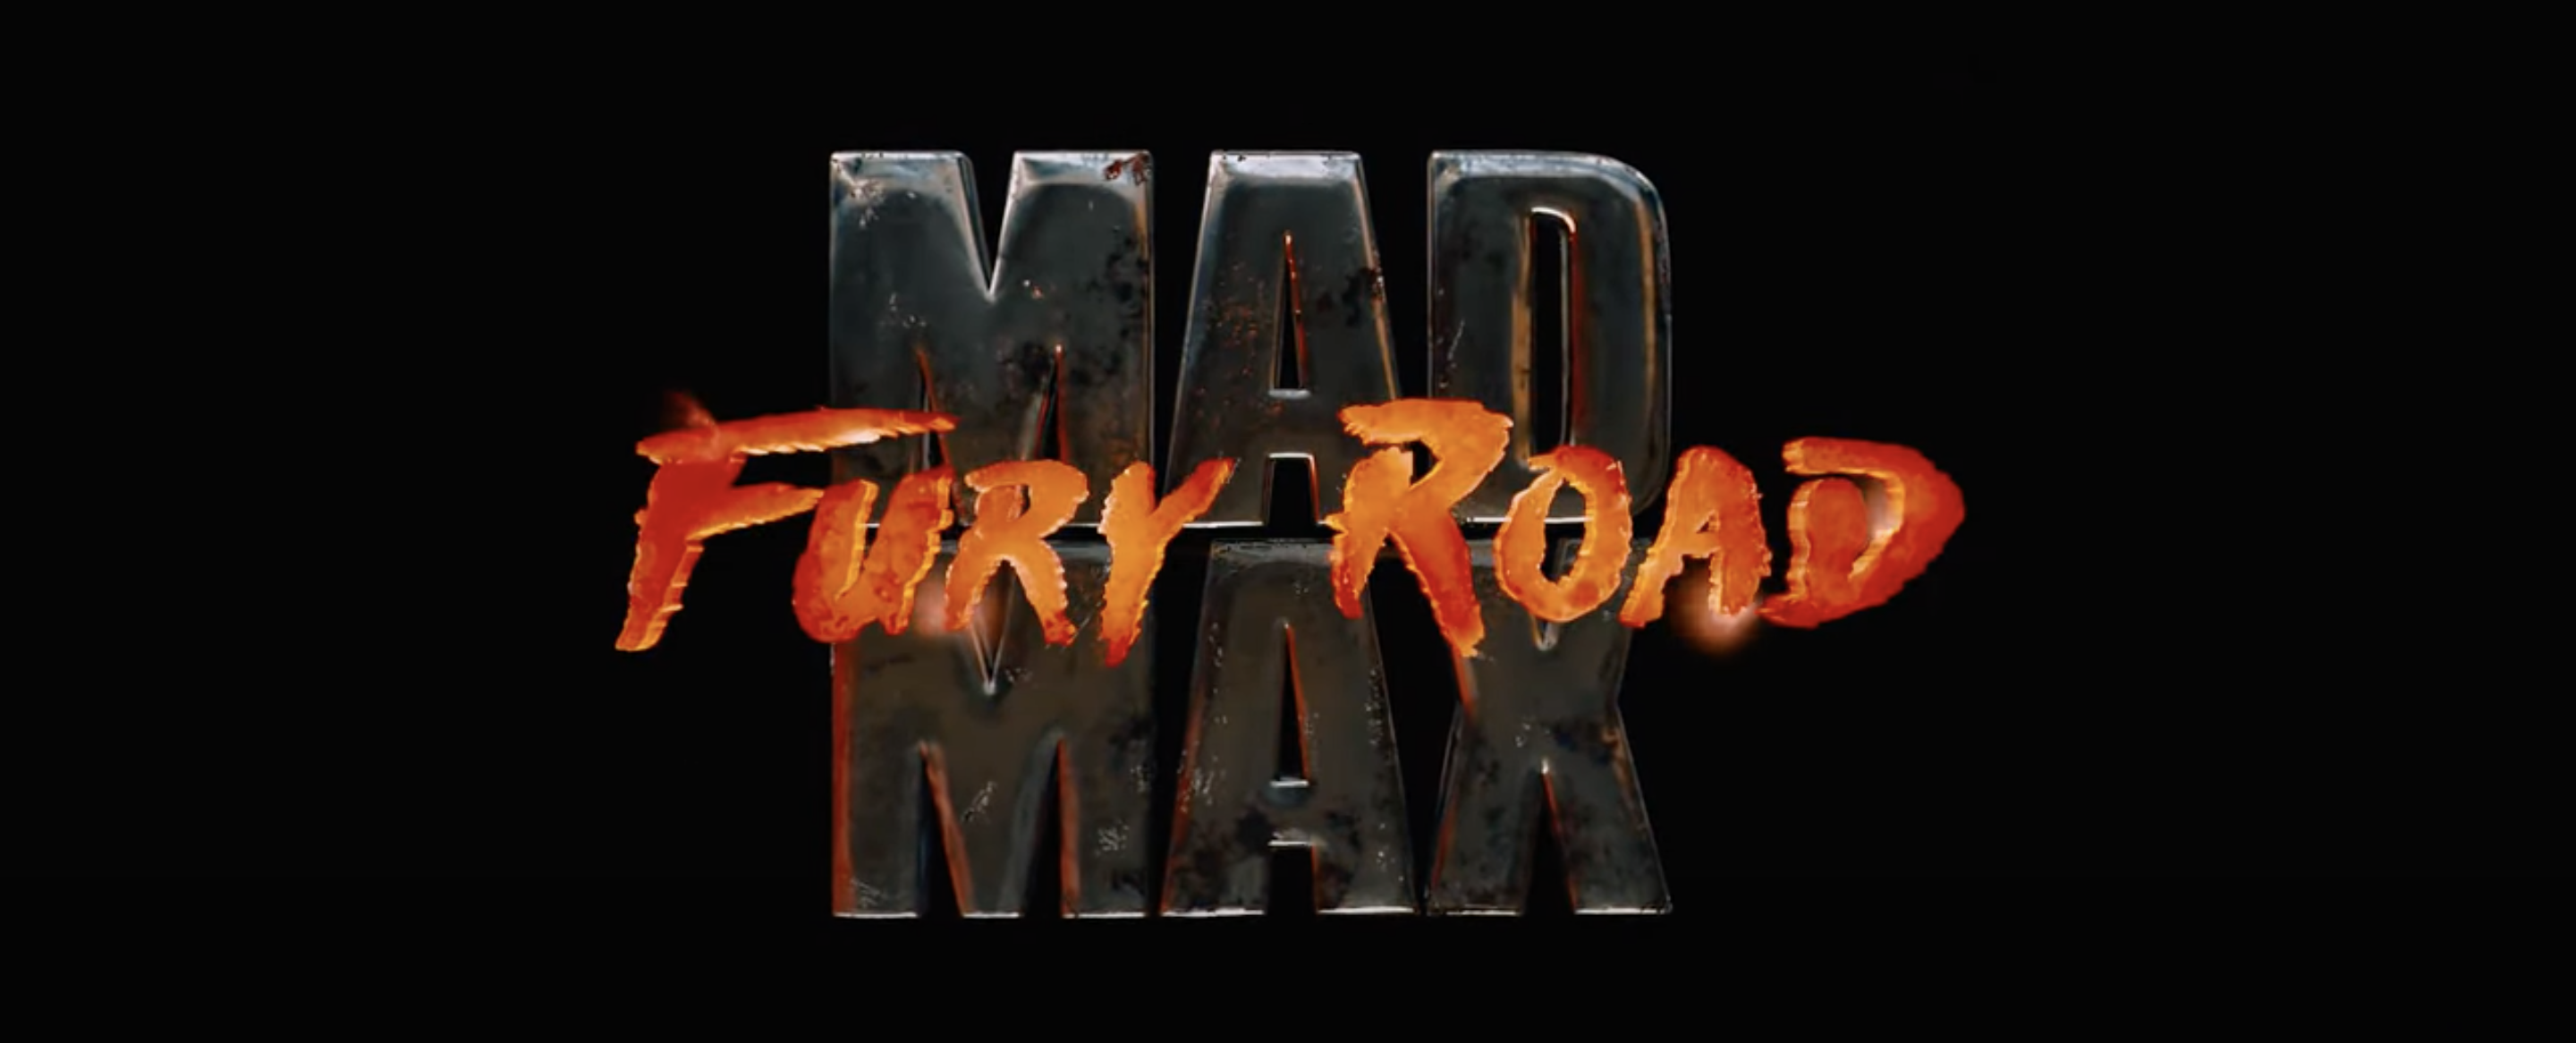 The title card for &quot;Mad Max: Fury Road&quot;